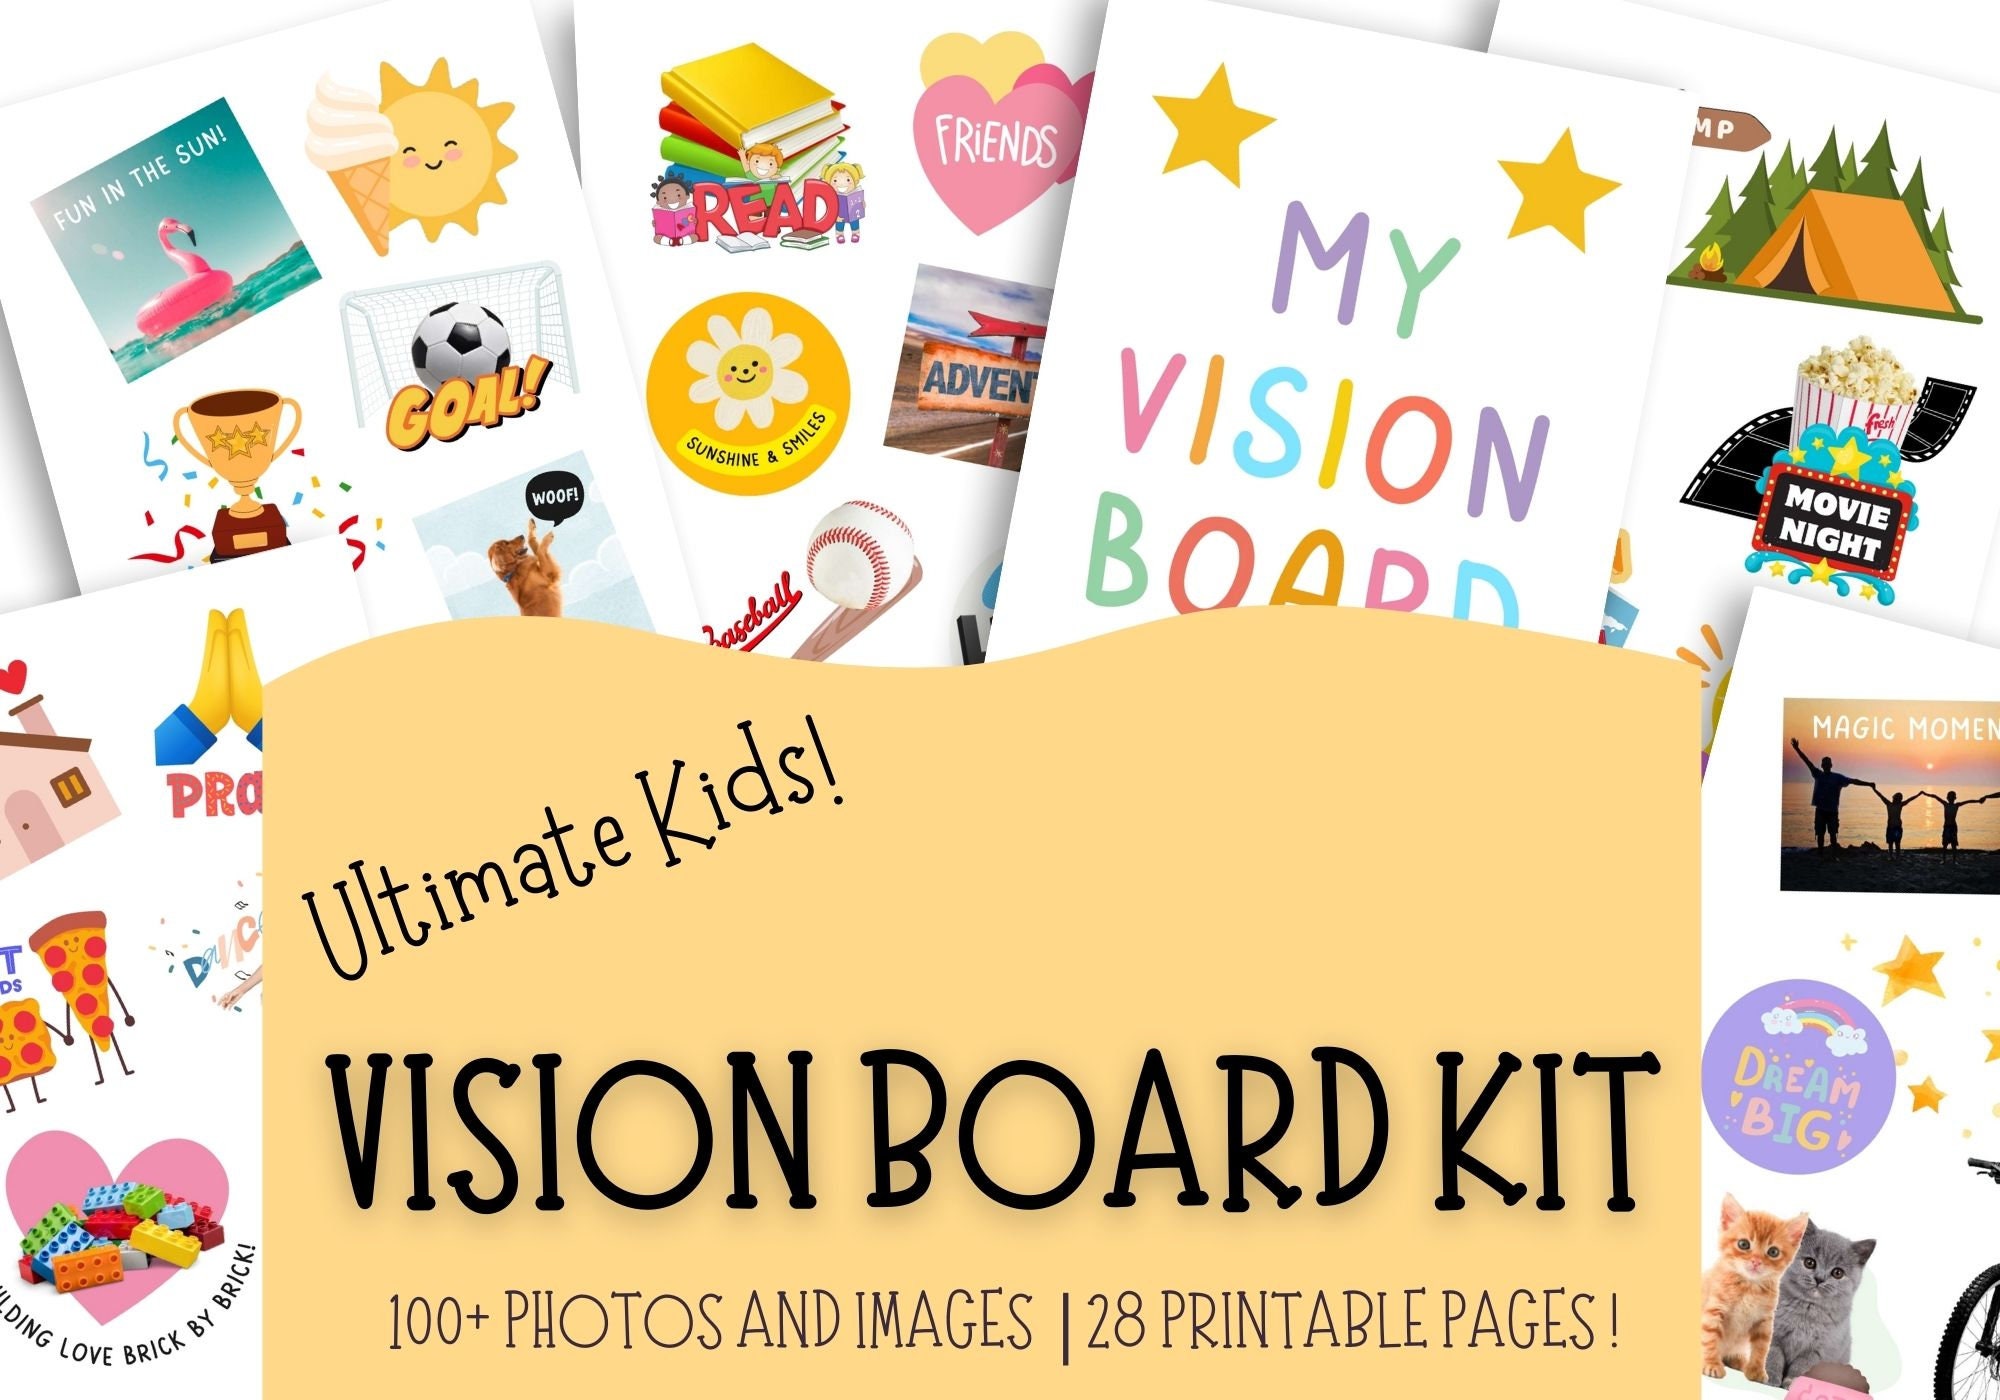 Vision Board Clip Art Book for Black Boys: Vision Board Kit for Kids Supplies with Pictures, Quotes and Words for Black Boys to Manifest Their Best